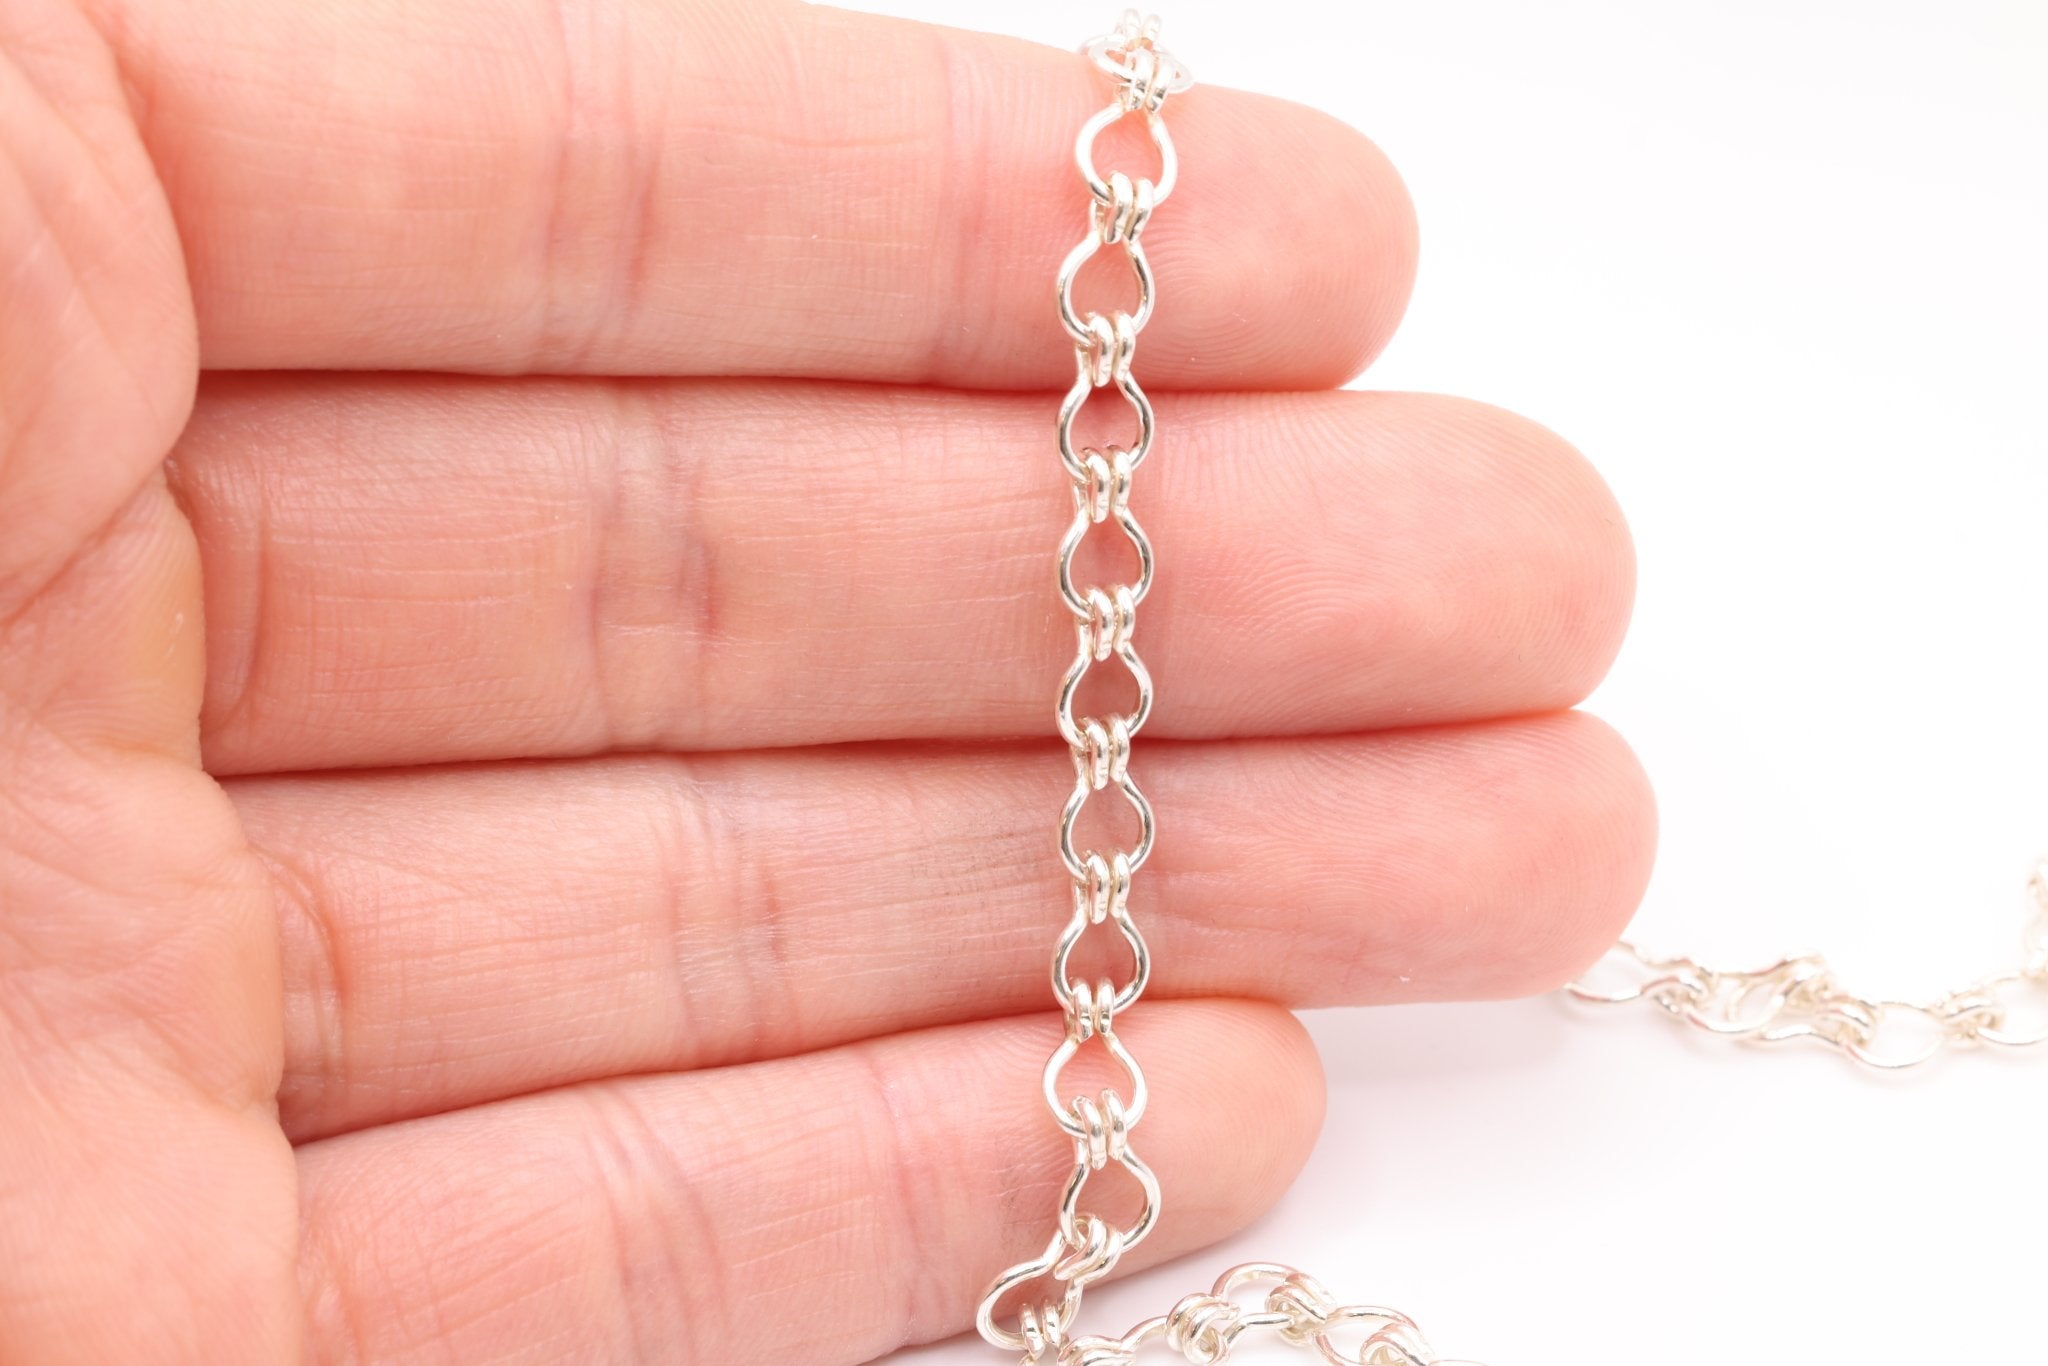 5mm Ladder Chain, Sterling Silver, Pay Per Foot, Jewelry Making Chain - HarperCrown